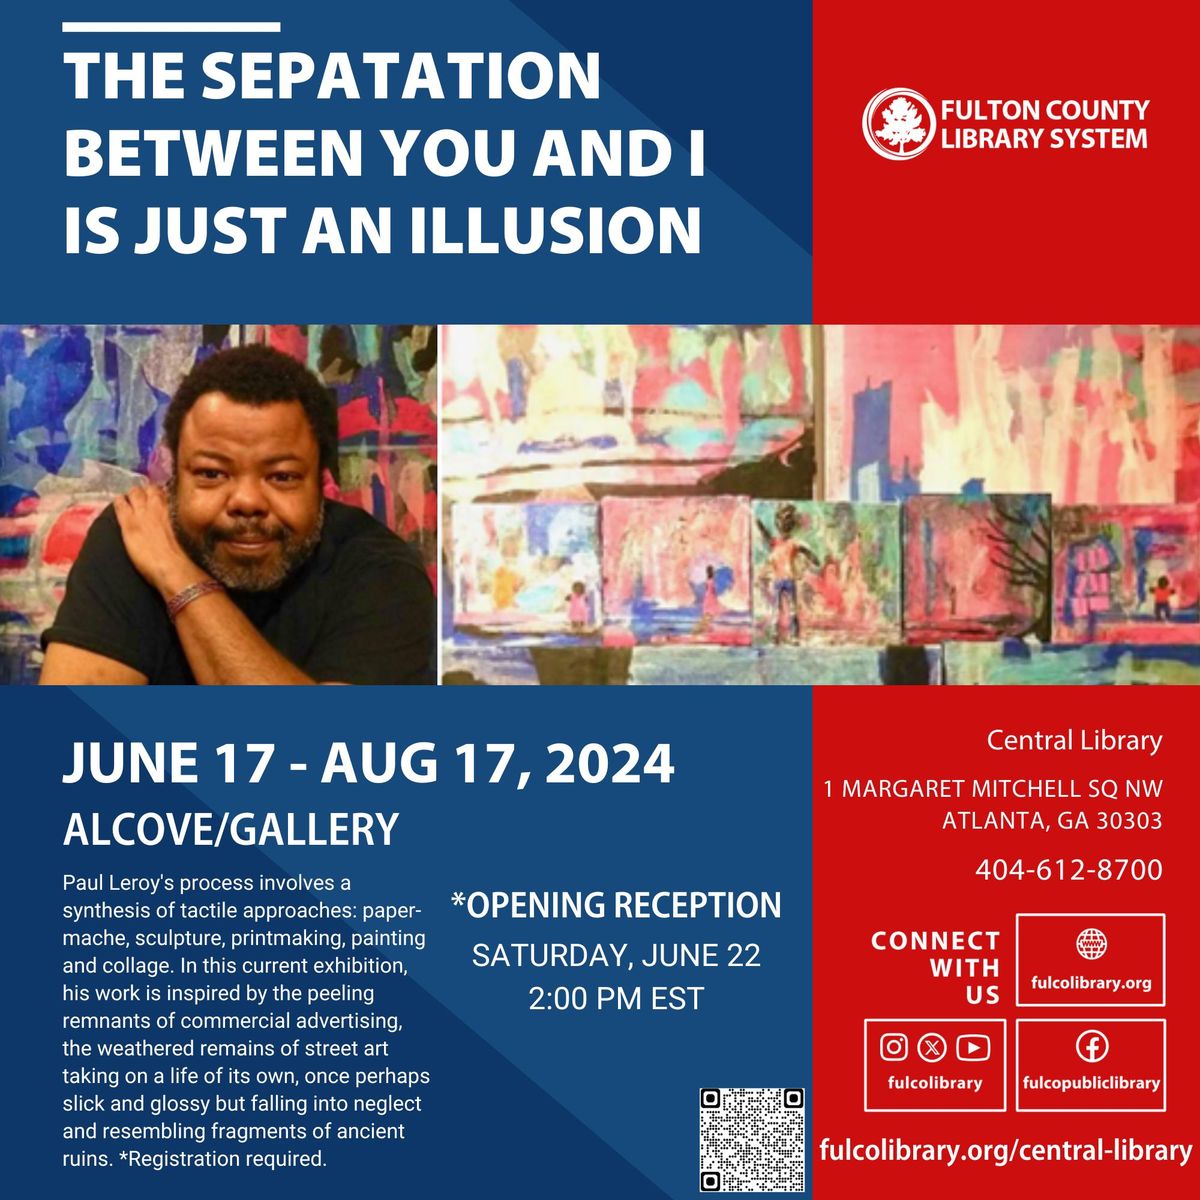 The Separation Between You and I is Just an Illusion Art Exhibit by Paul Leroy